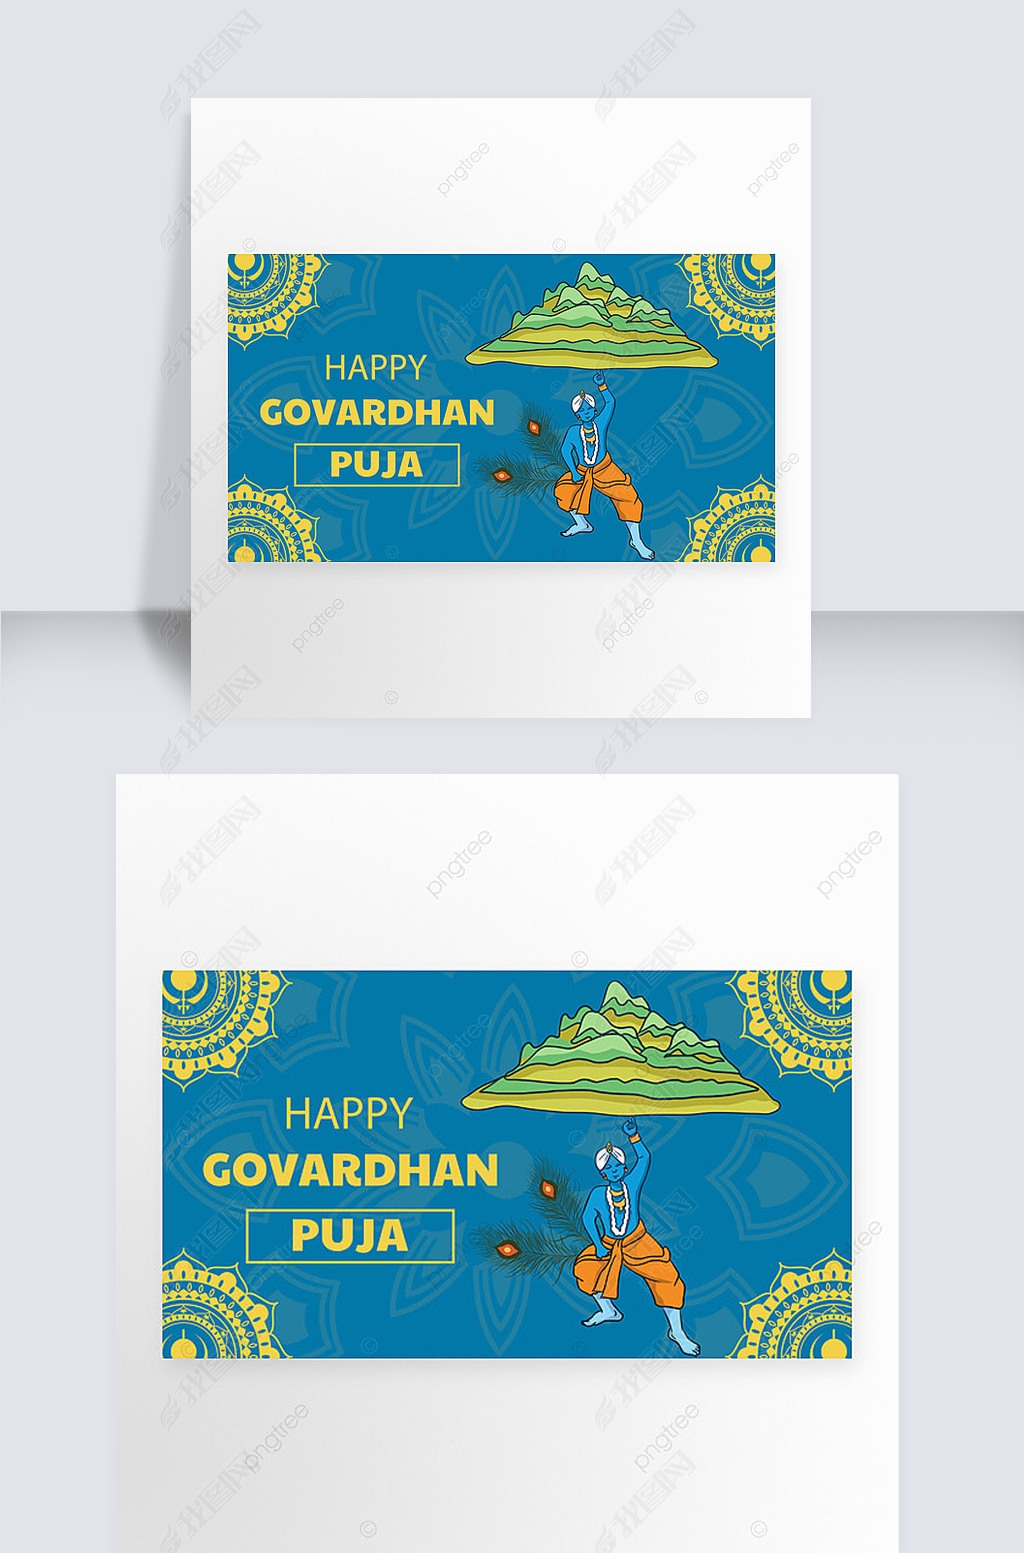 govardhan puja creative contracted banner